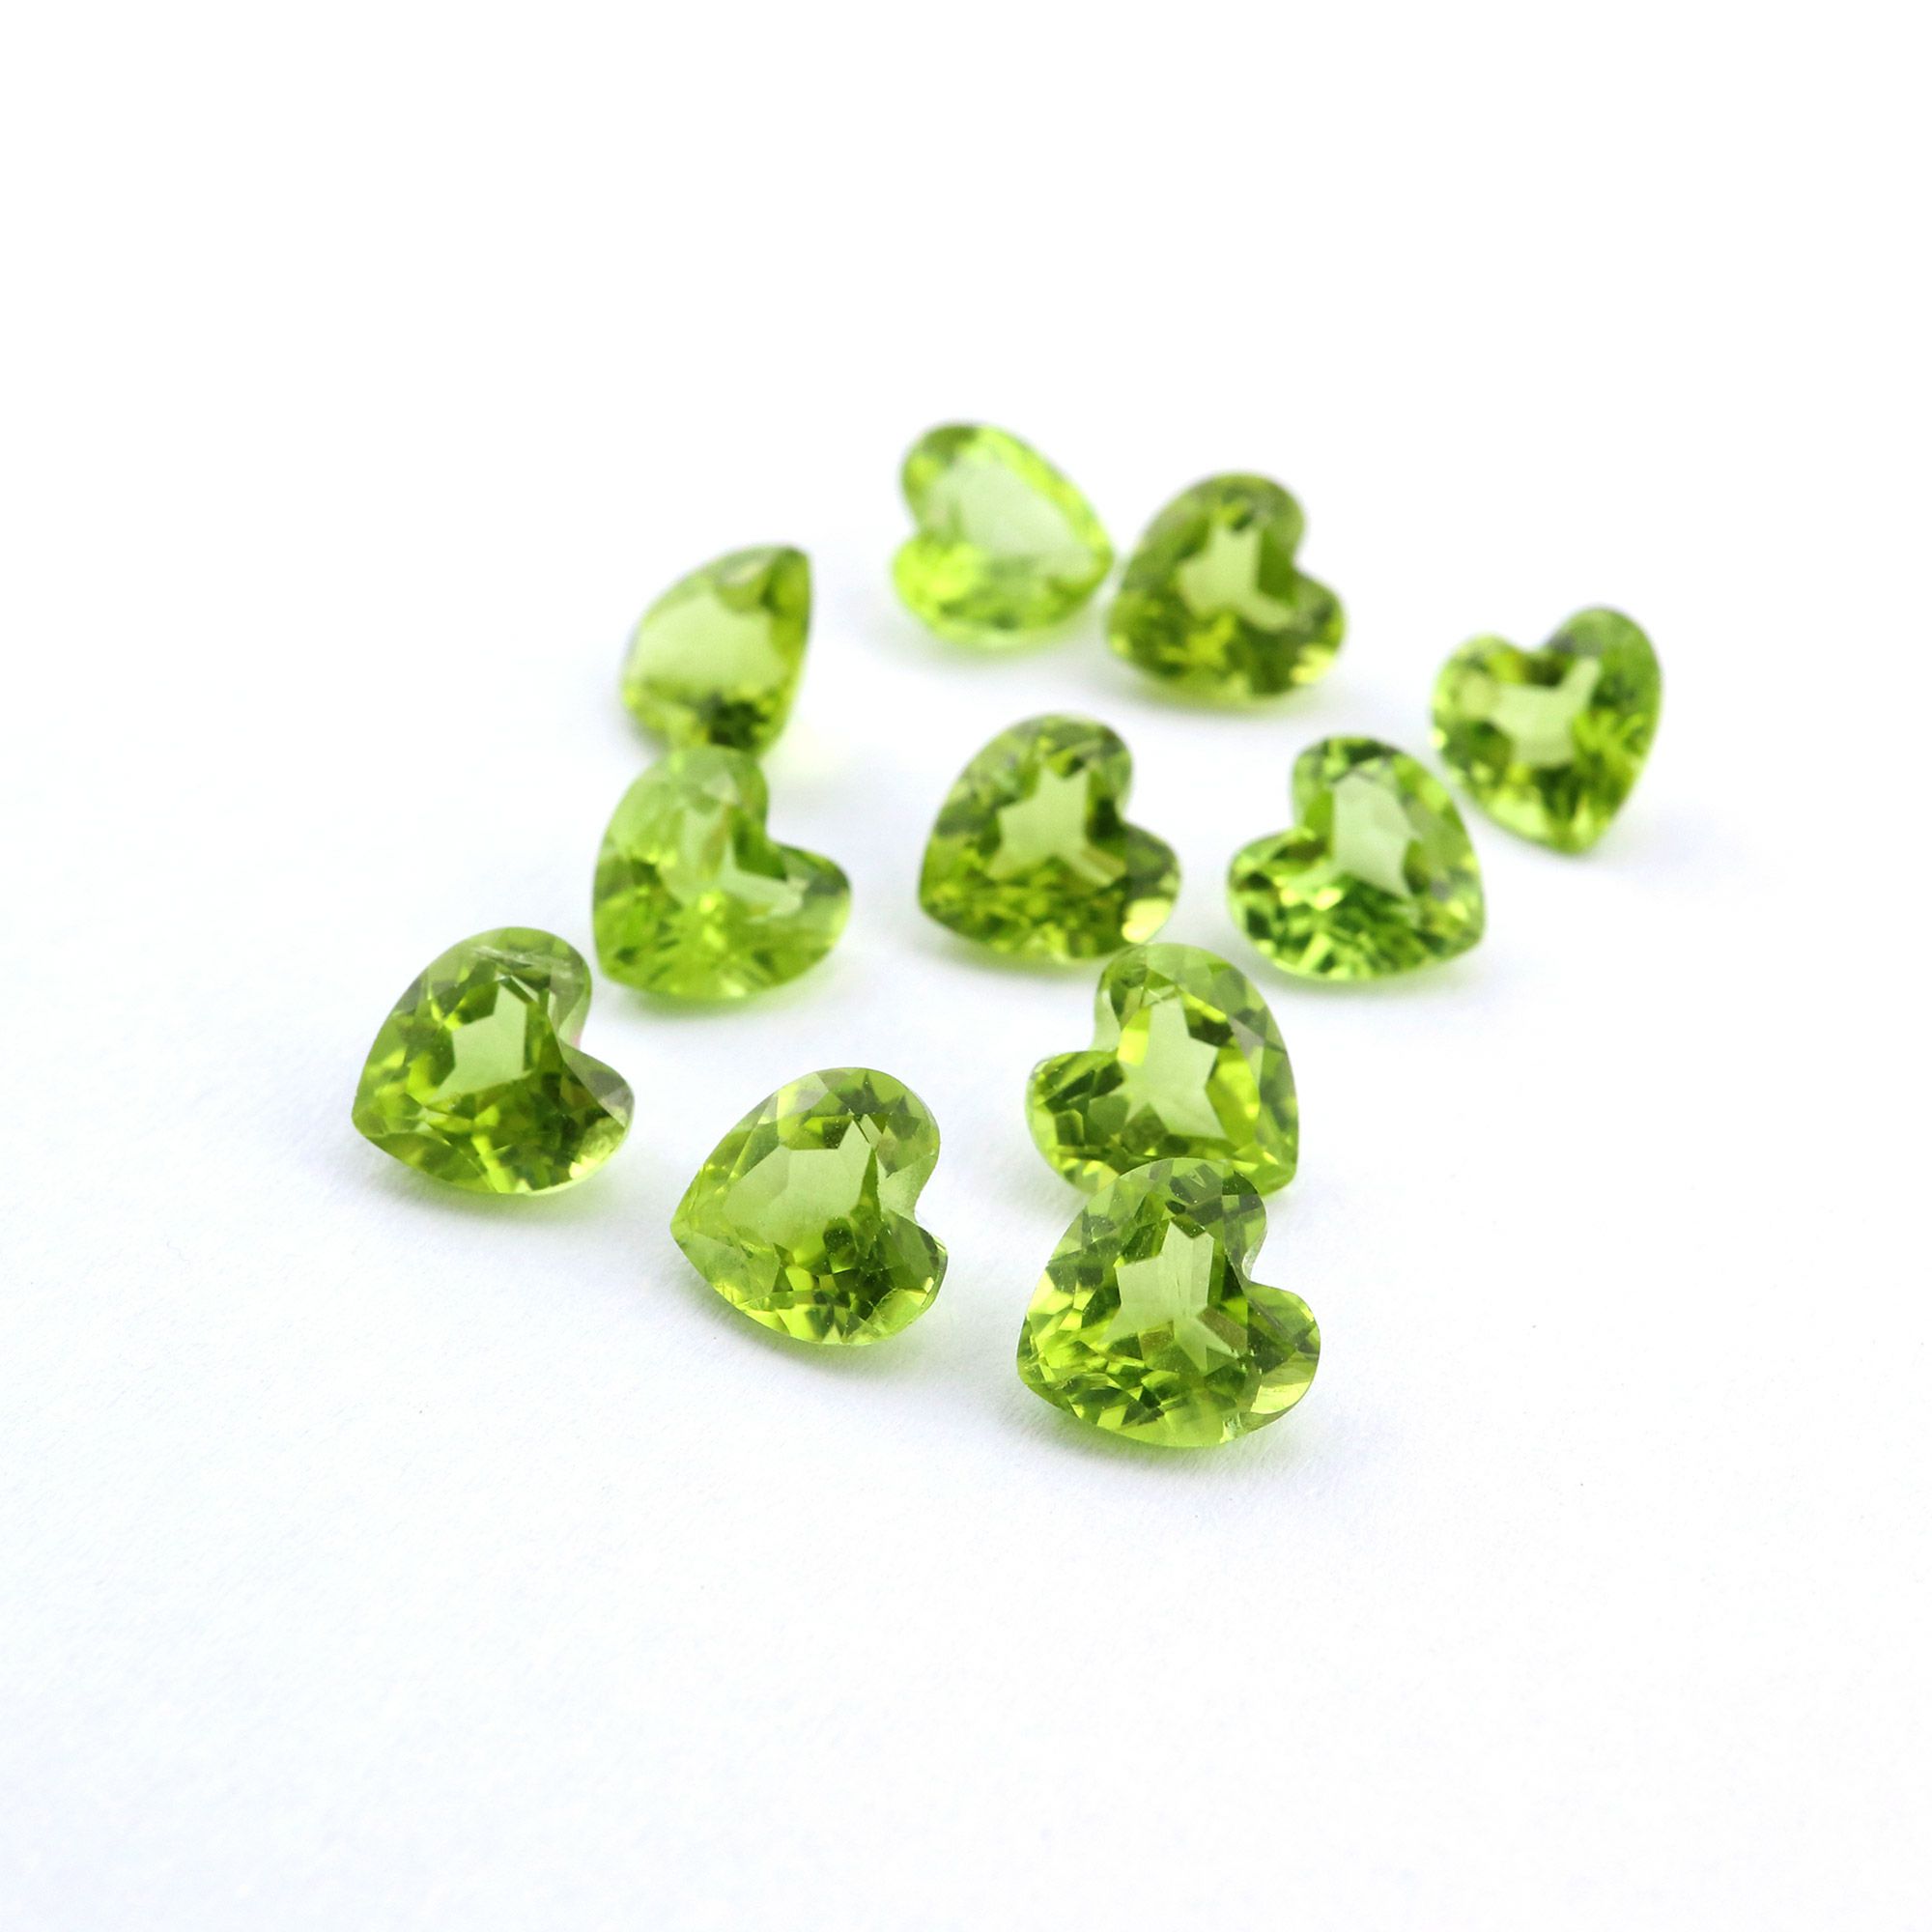 1Pcs 4-8MM Heart Green Peridot August Birthstone Faceted Cut Loose Gemstone Natural Semi Precious Stone DIY Jewelry Supplies 4130010 - Click Image to Close